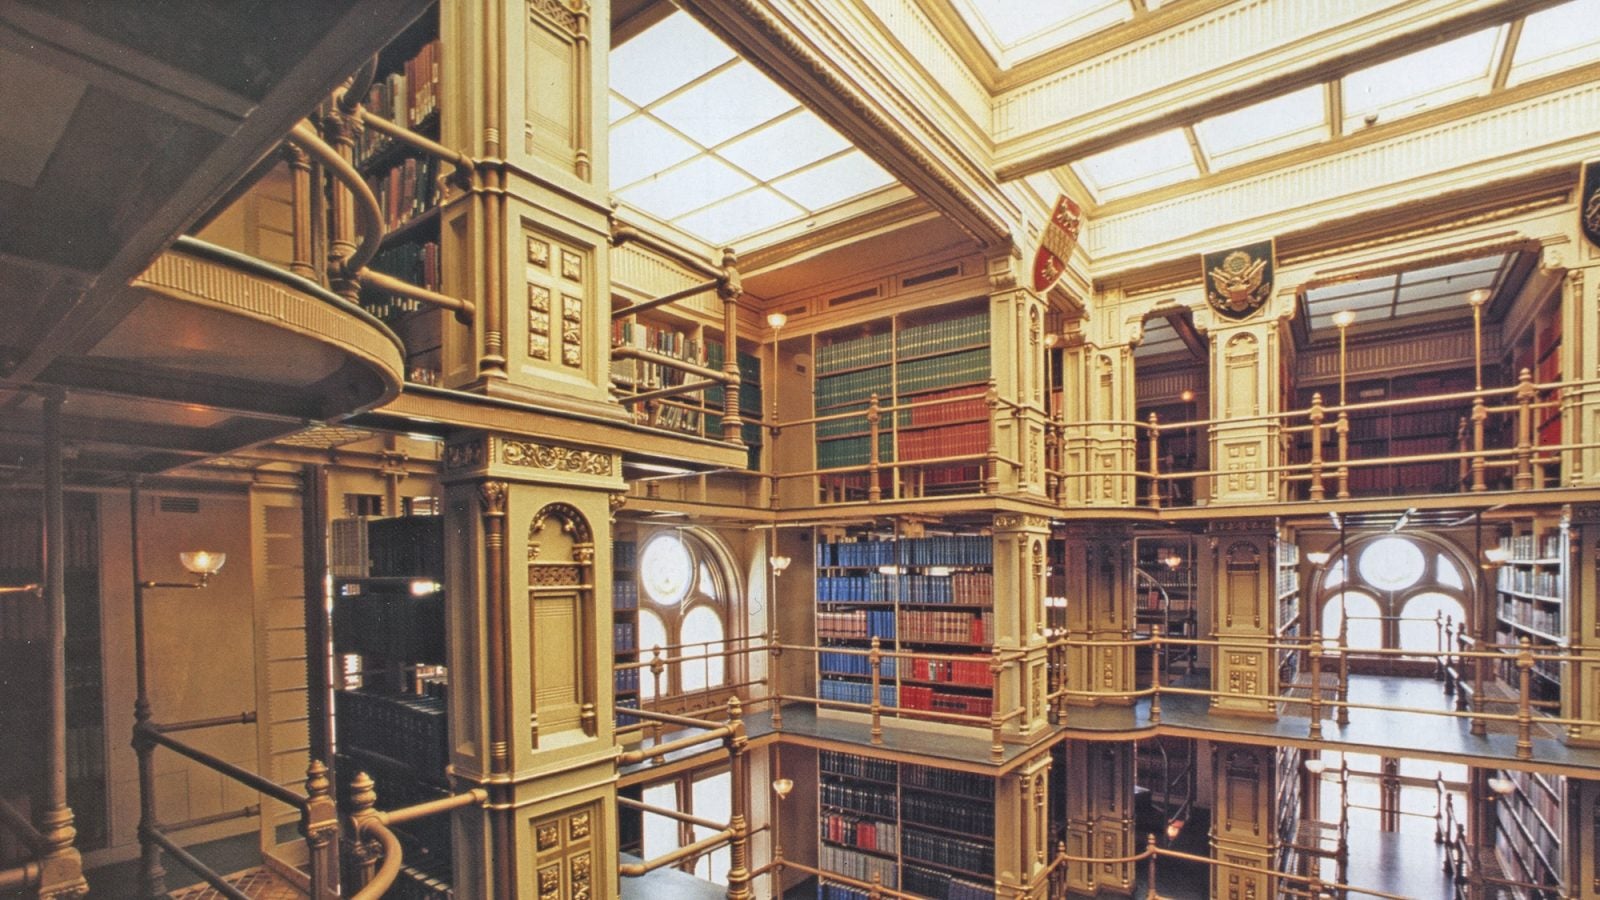 Victorian cast iron library with sky lights, bookshelves, and walkways.